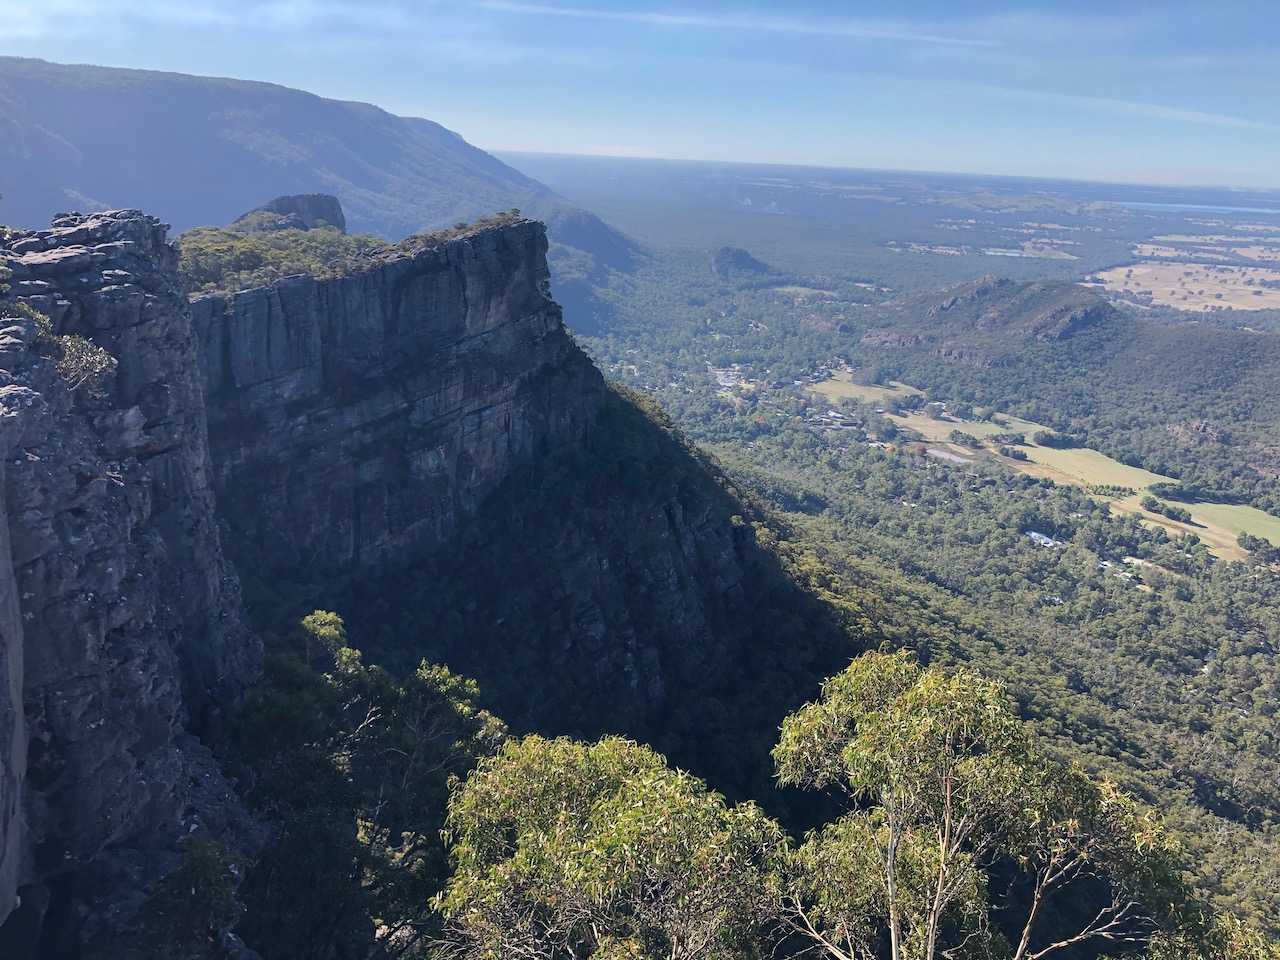 Looking out at Relph Peak from the Pinnacle, Grampians